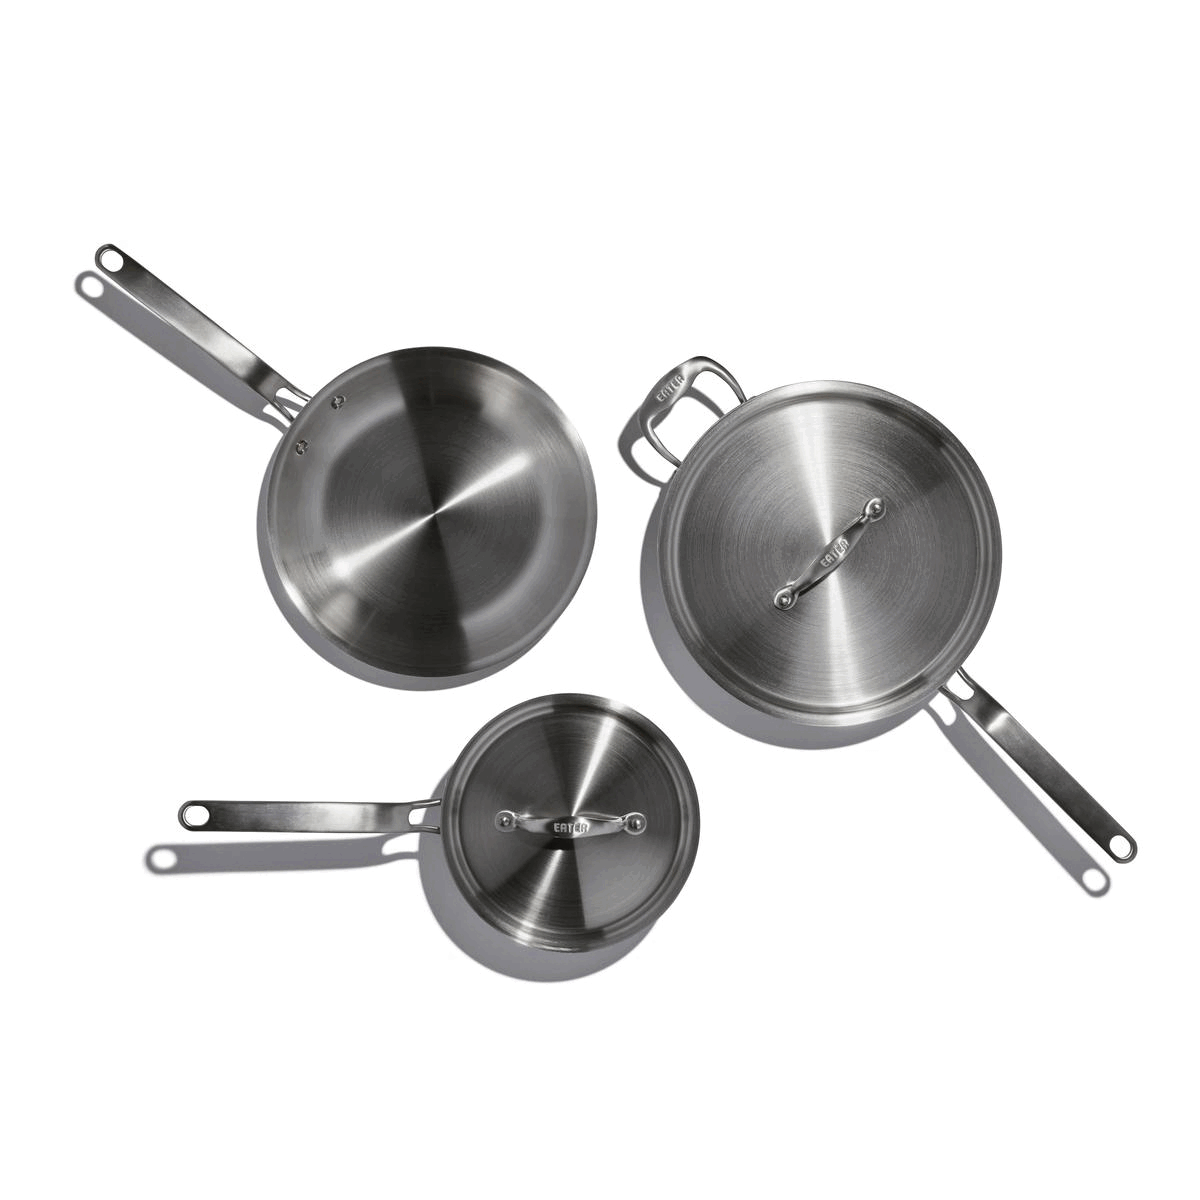 Eater x Heritage Steel 10 Piece Cookware Set | Made in USA | 5 Ply Fully  Clad Stainless Steel Cookware Set | Stay Cool Handle | Induction Cookware  Set